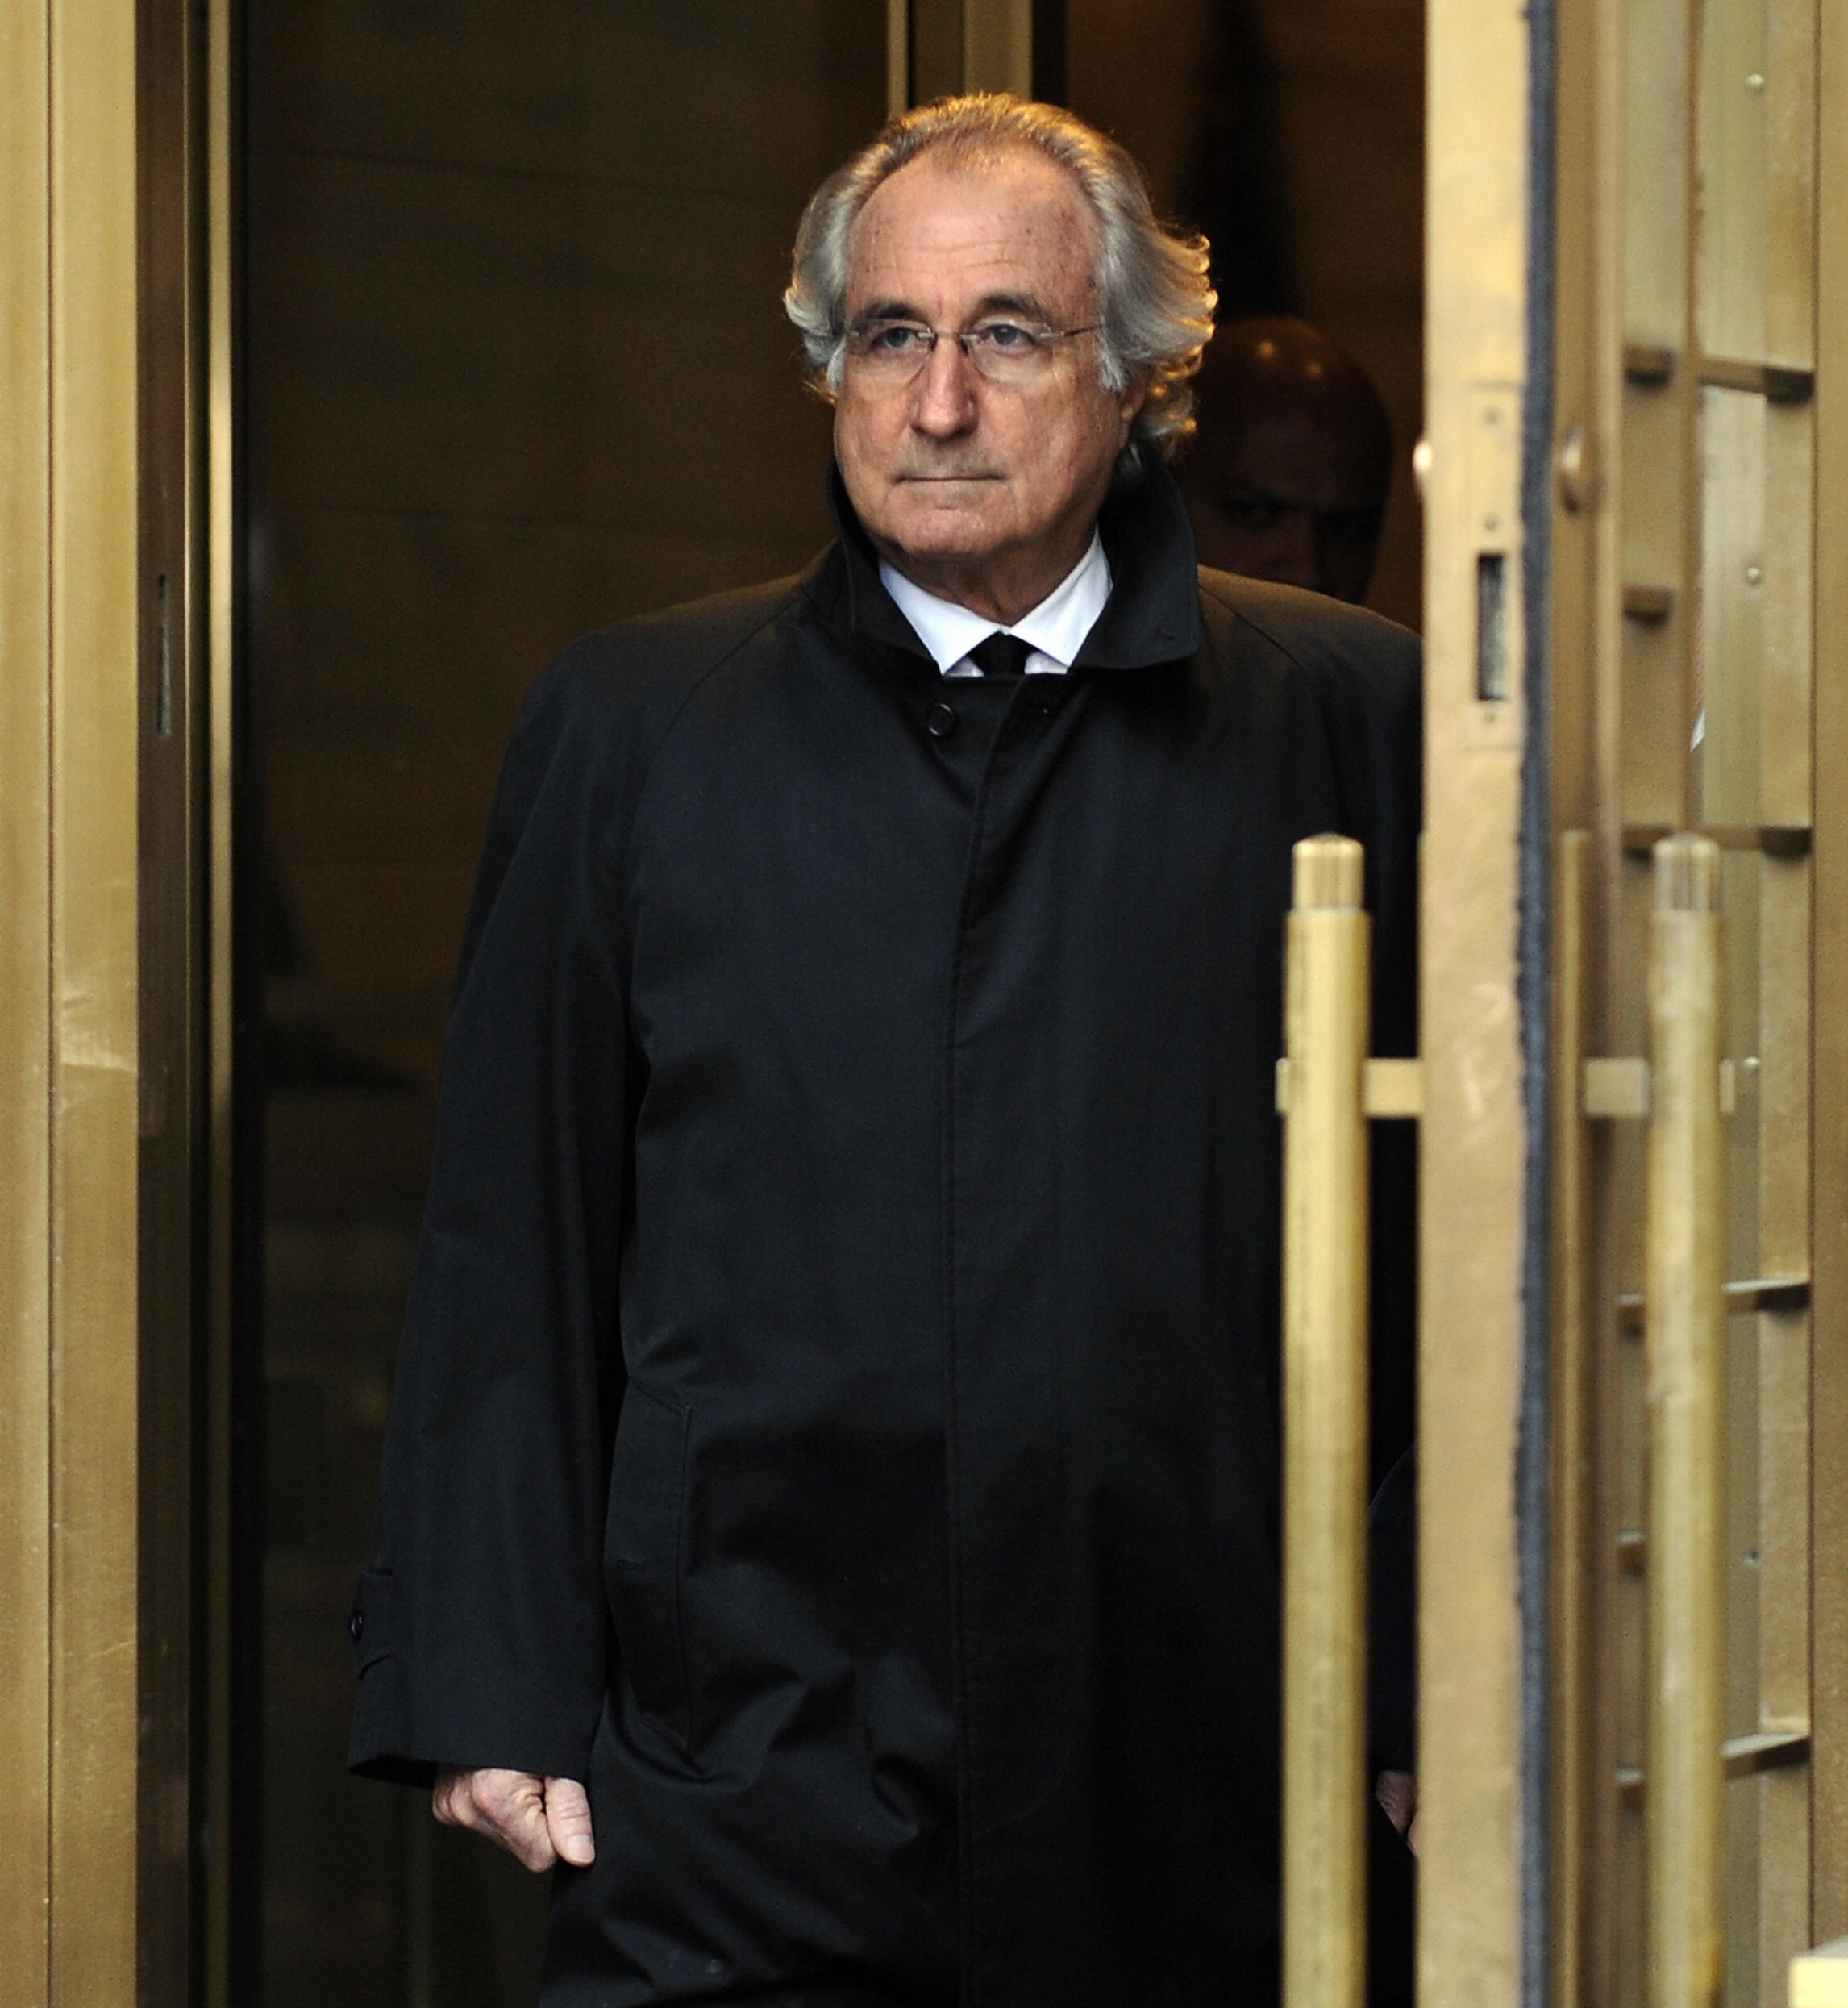 Bernie Madoff Is Mad About His Portrayal in Biographical Mini-Series